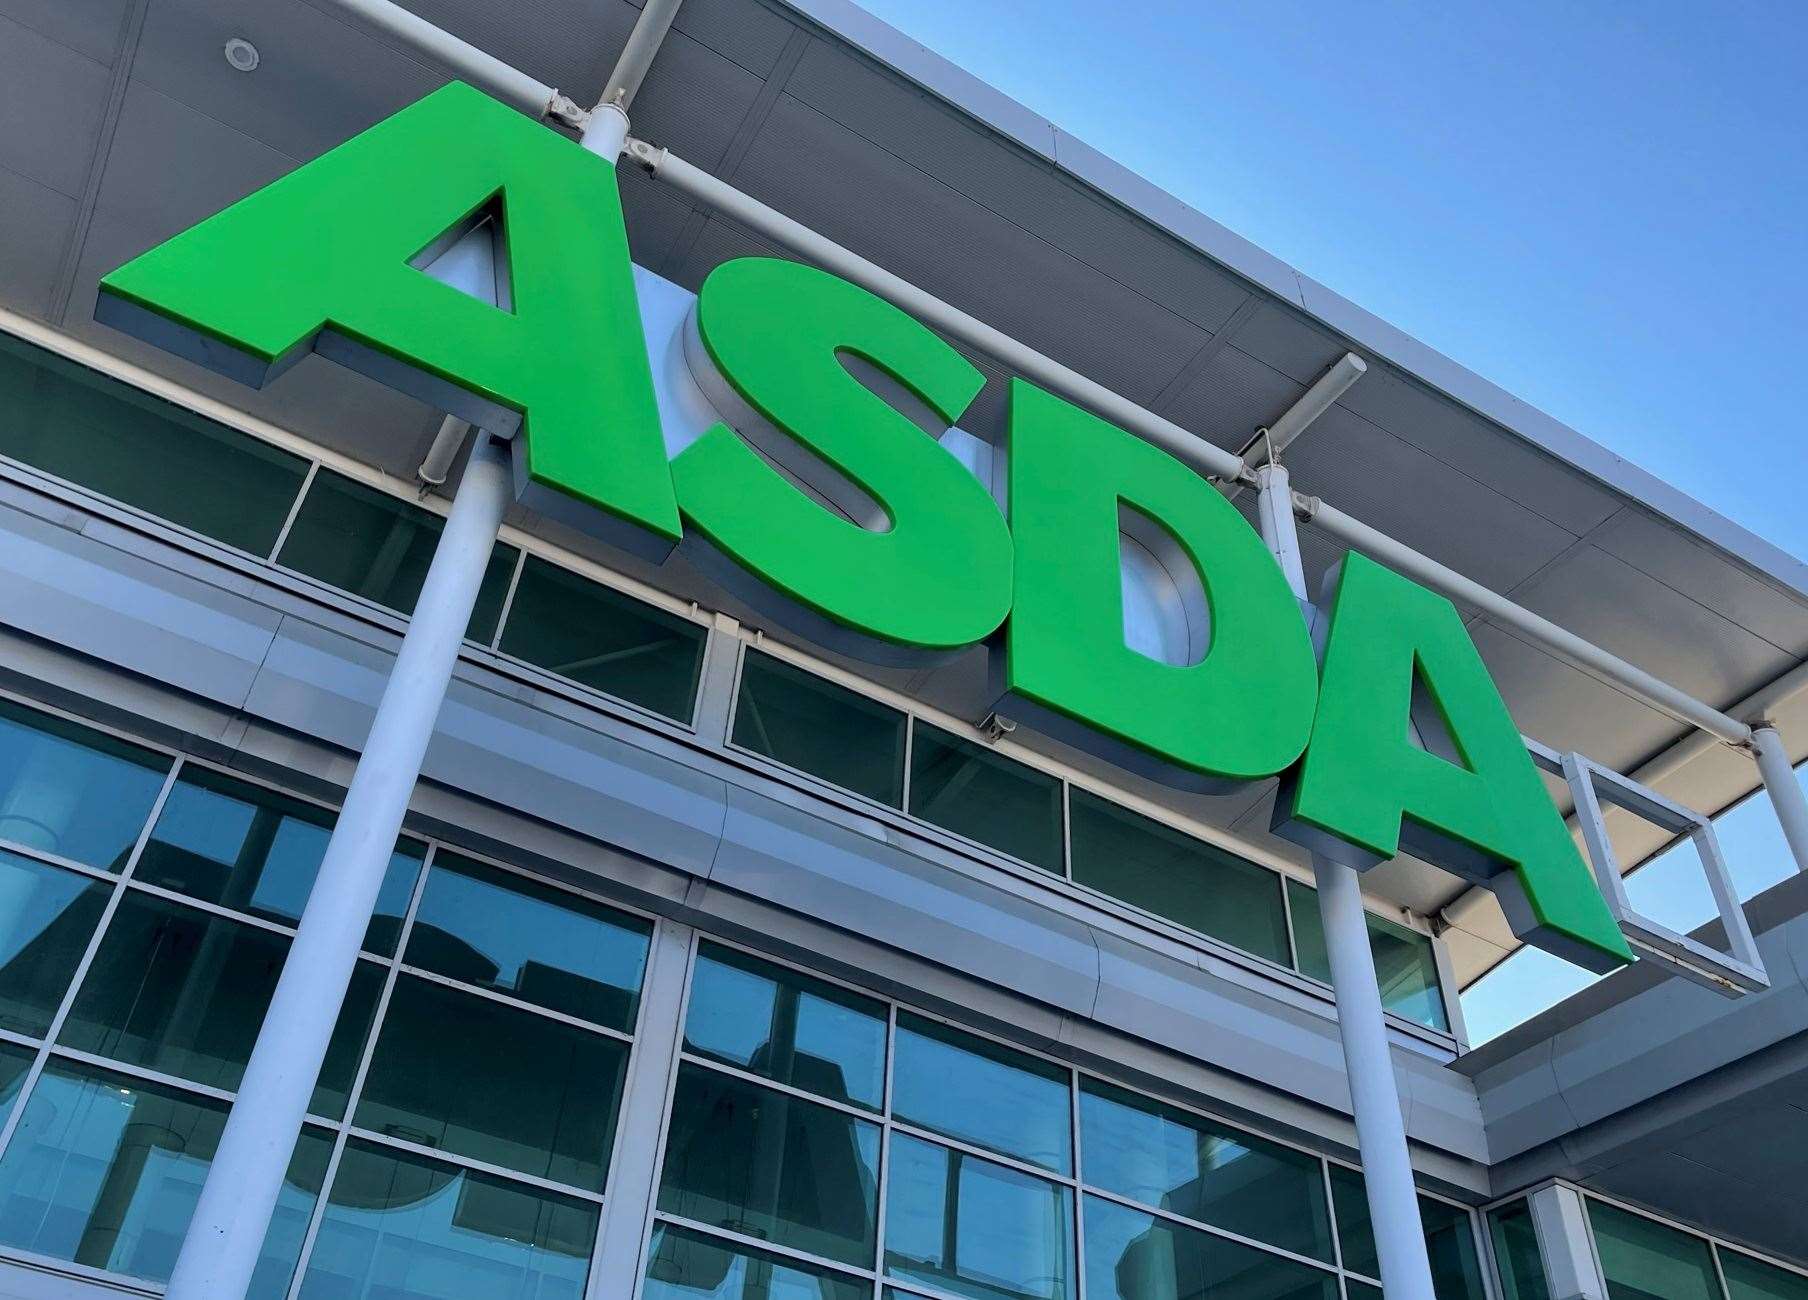 Asda has lost its first place spot as the cheapest supermarket for a trolley shop